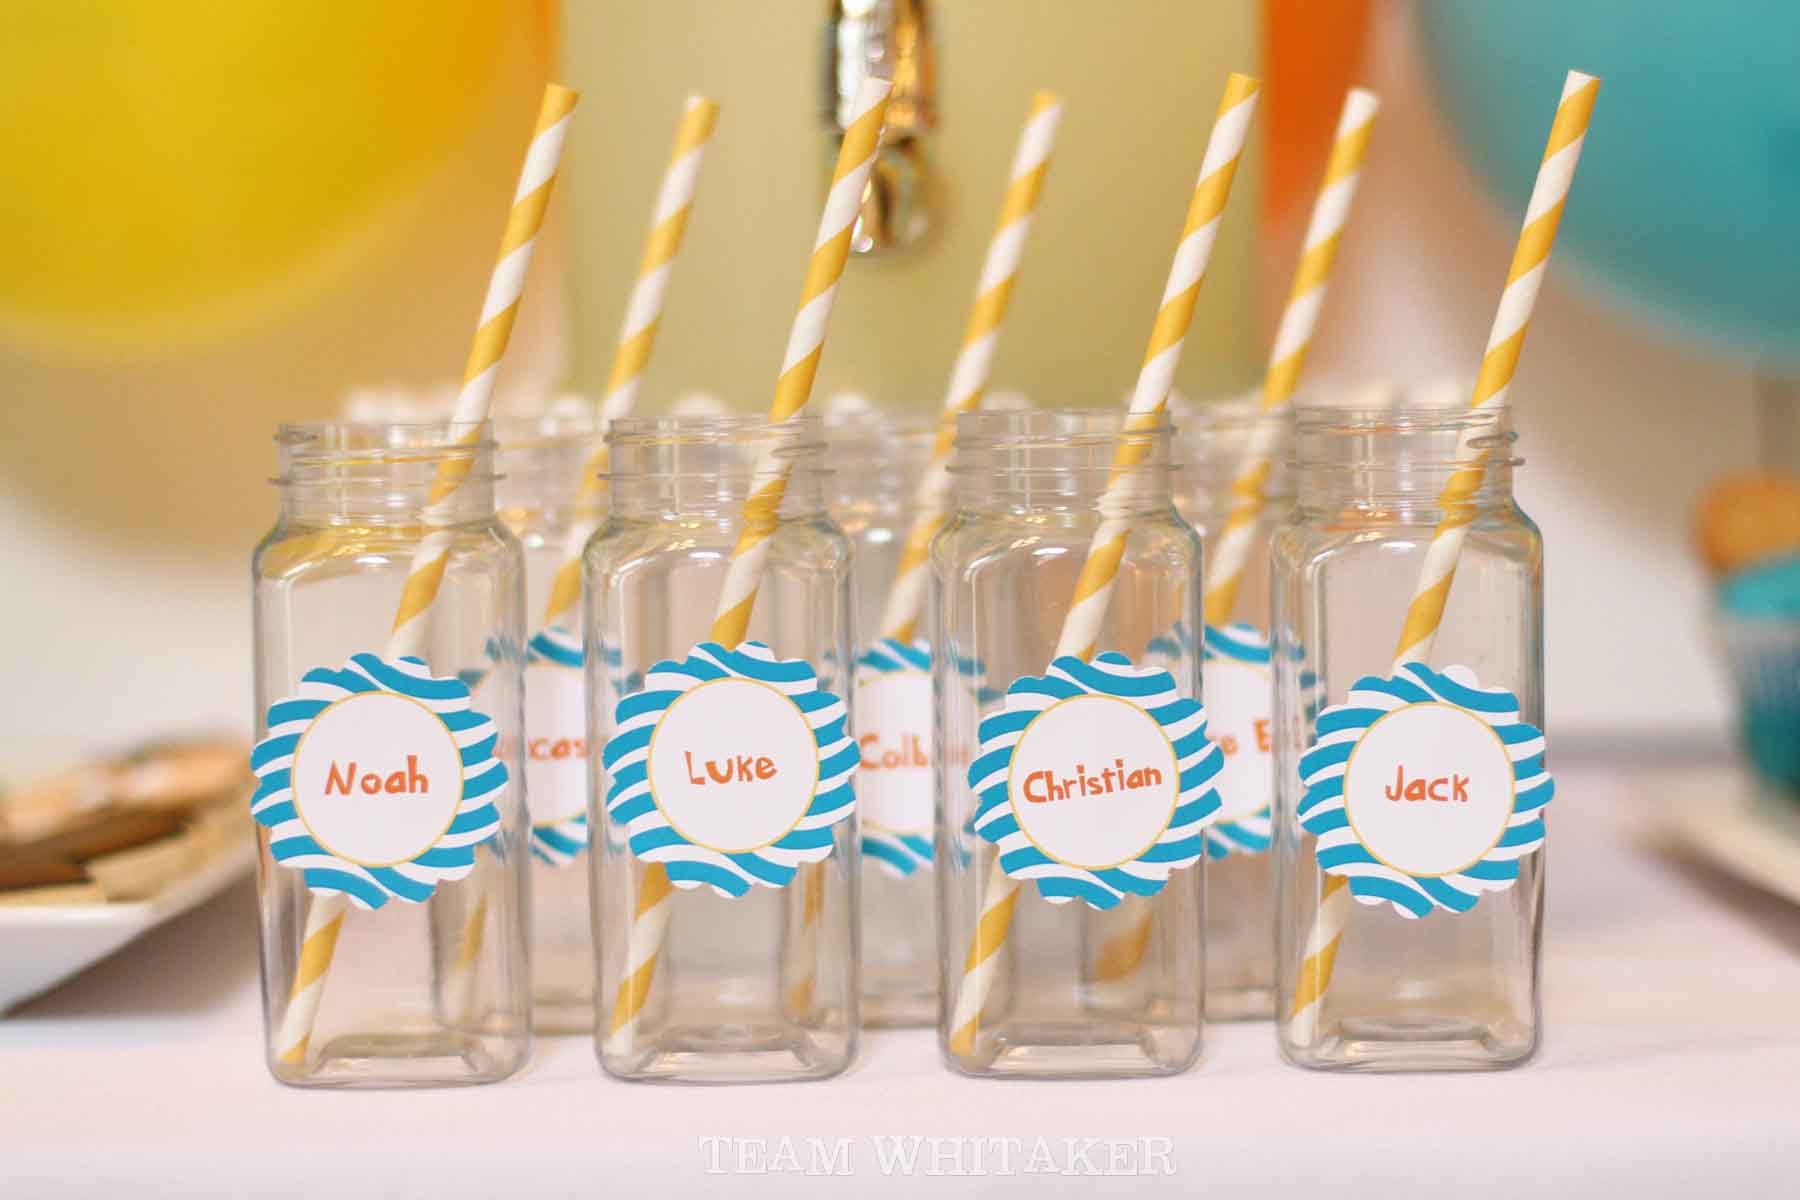 BUSTED! Ready to party with Phineas and Ferb? Here, you'll find easy party activities, simple DIY decorations, sweet treats and fun party favors even Dr. Doofenschmirtz would approve.